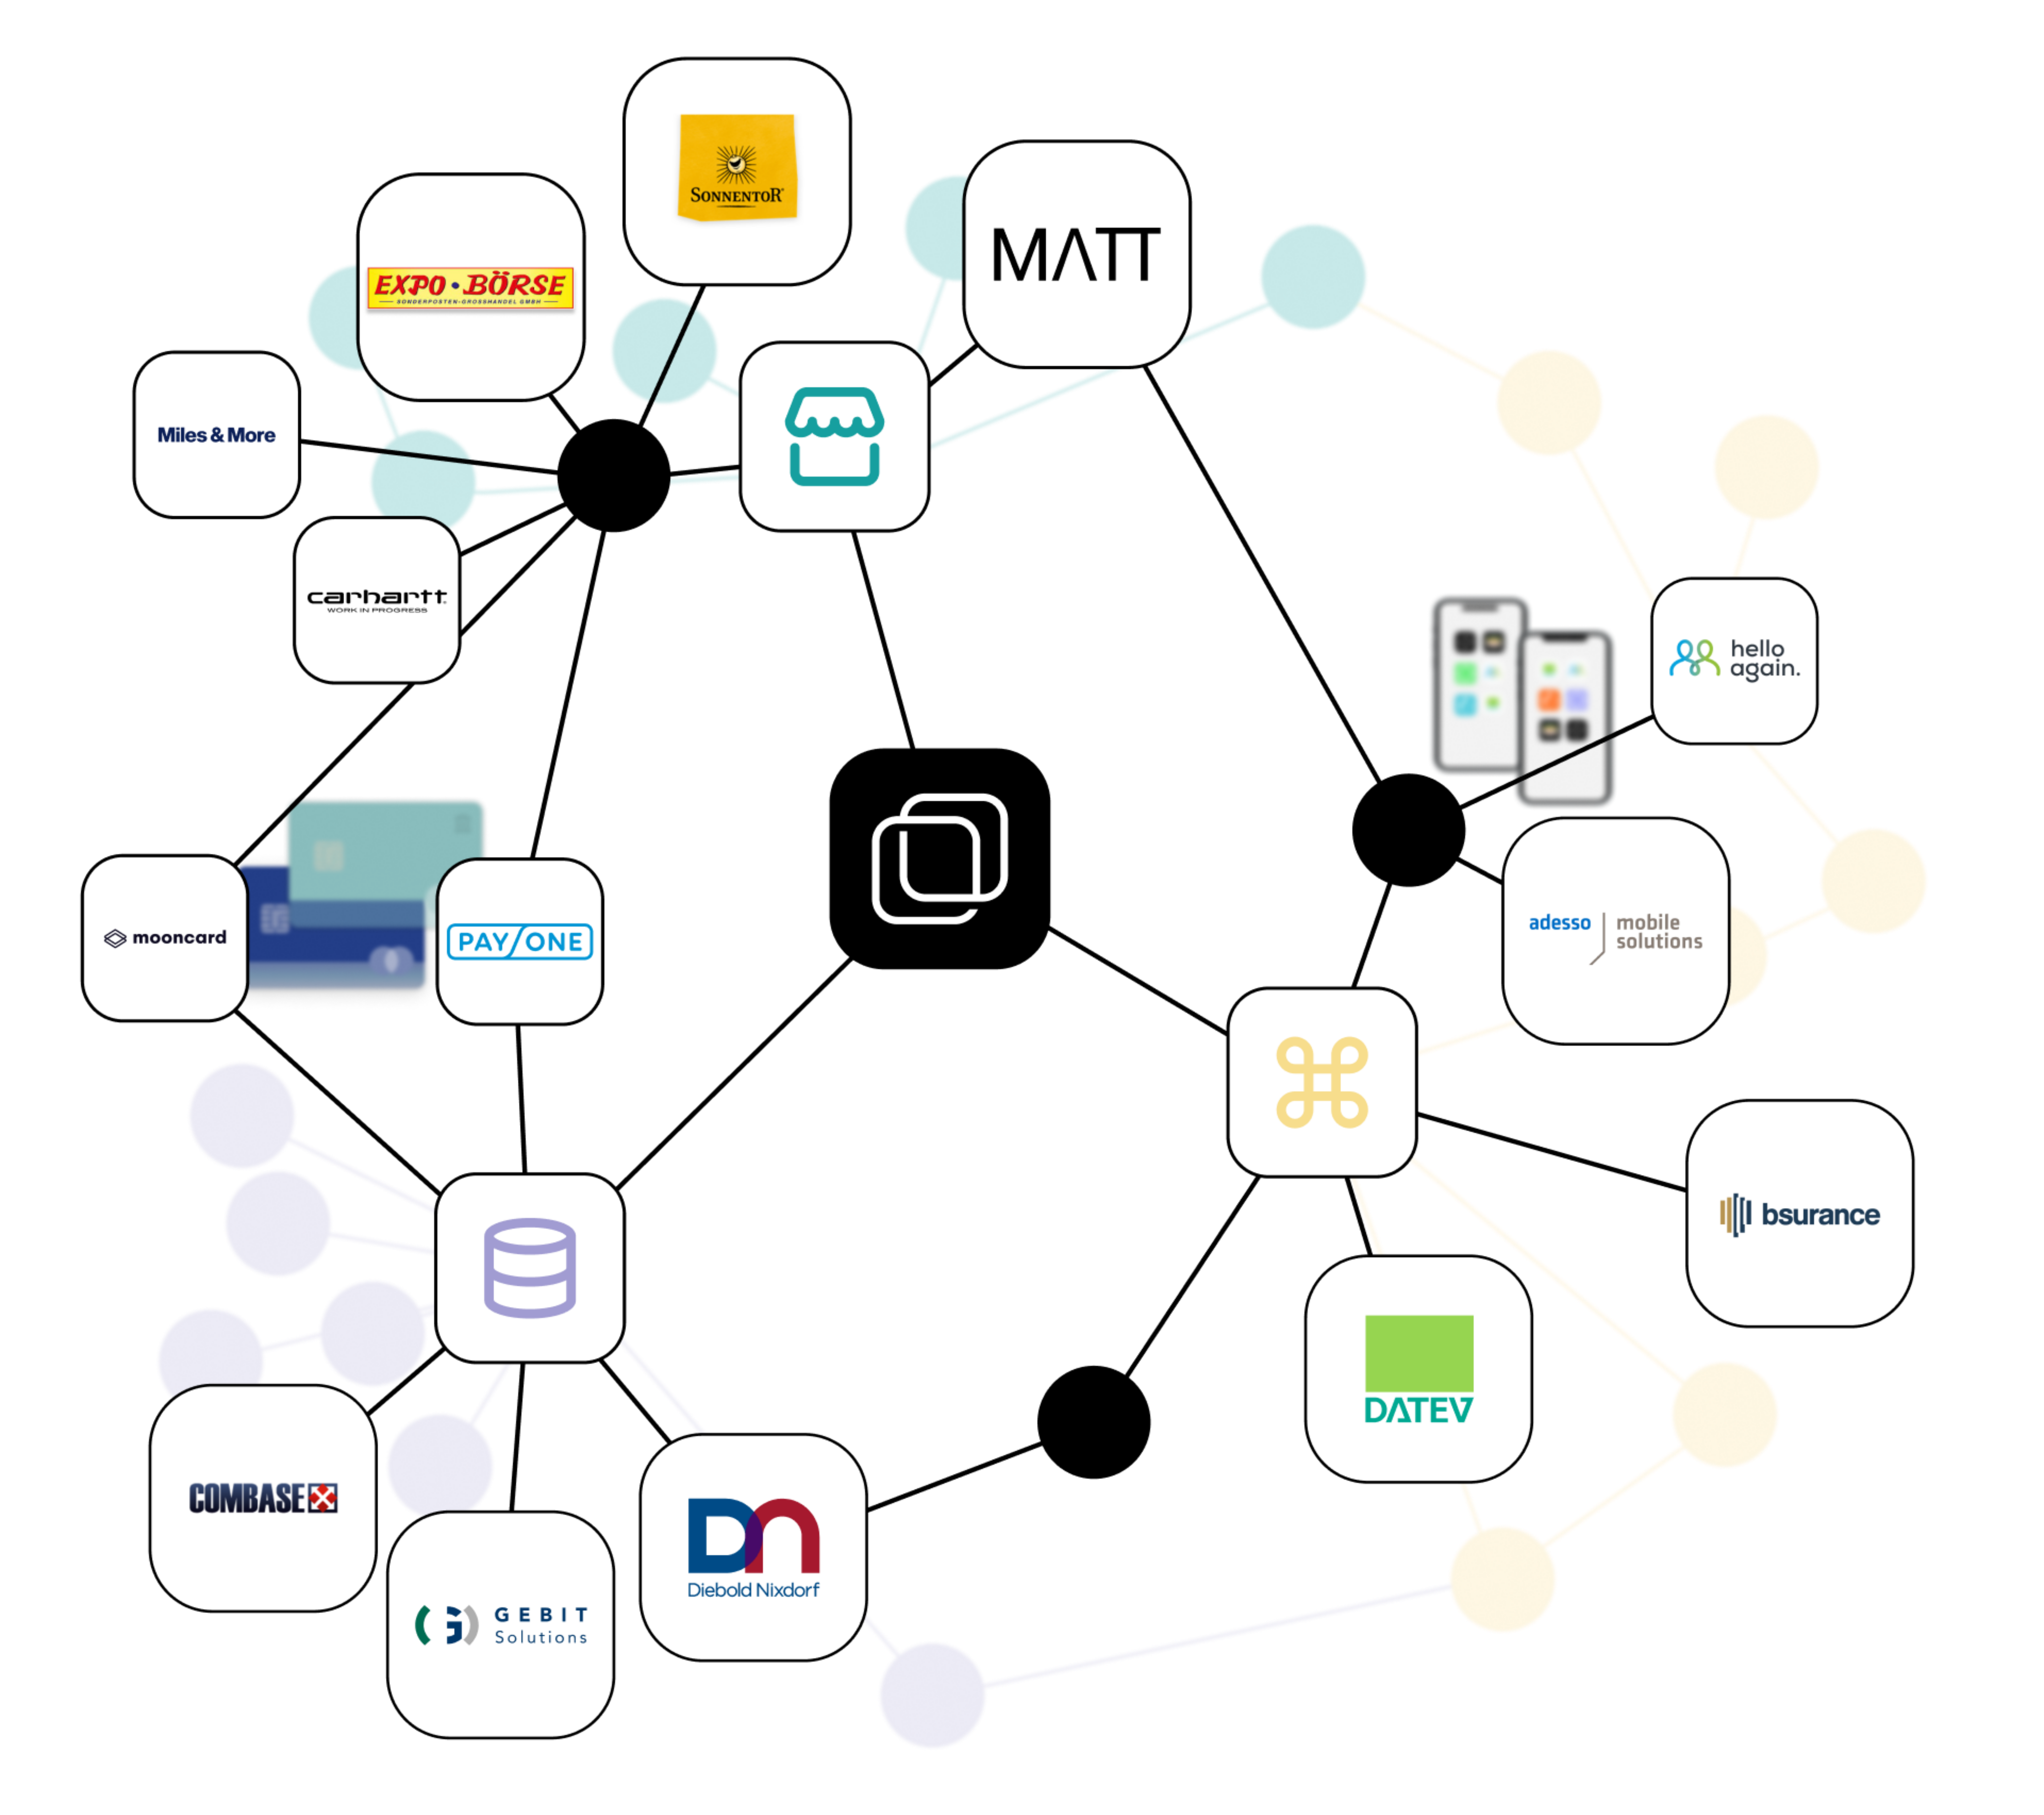 Illustrated representation of a network of different apps and icons with the anybill logo in the center